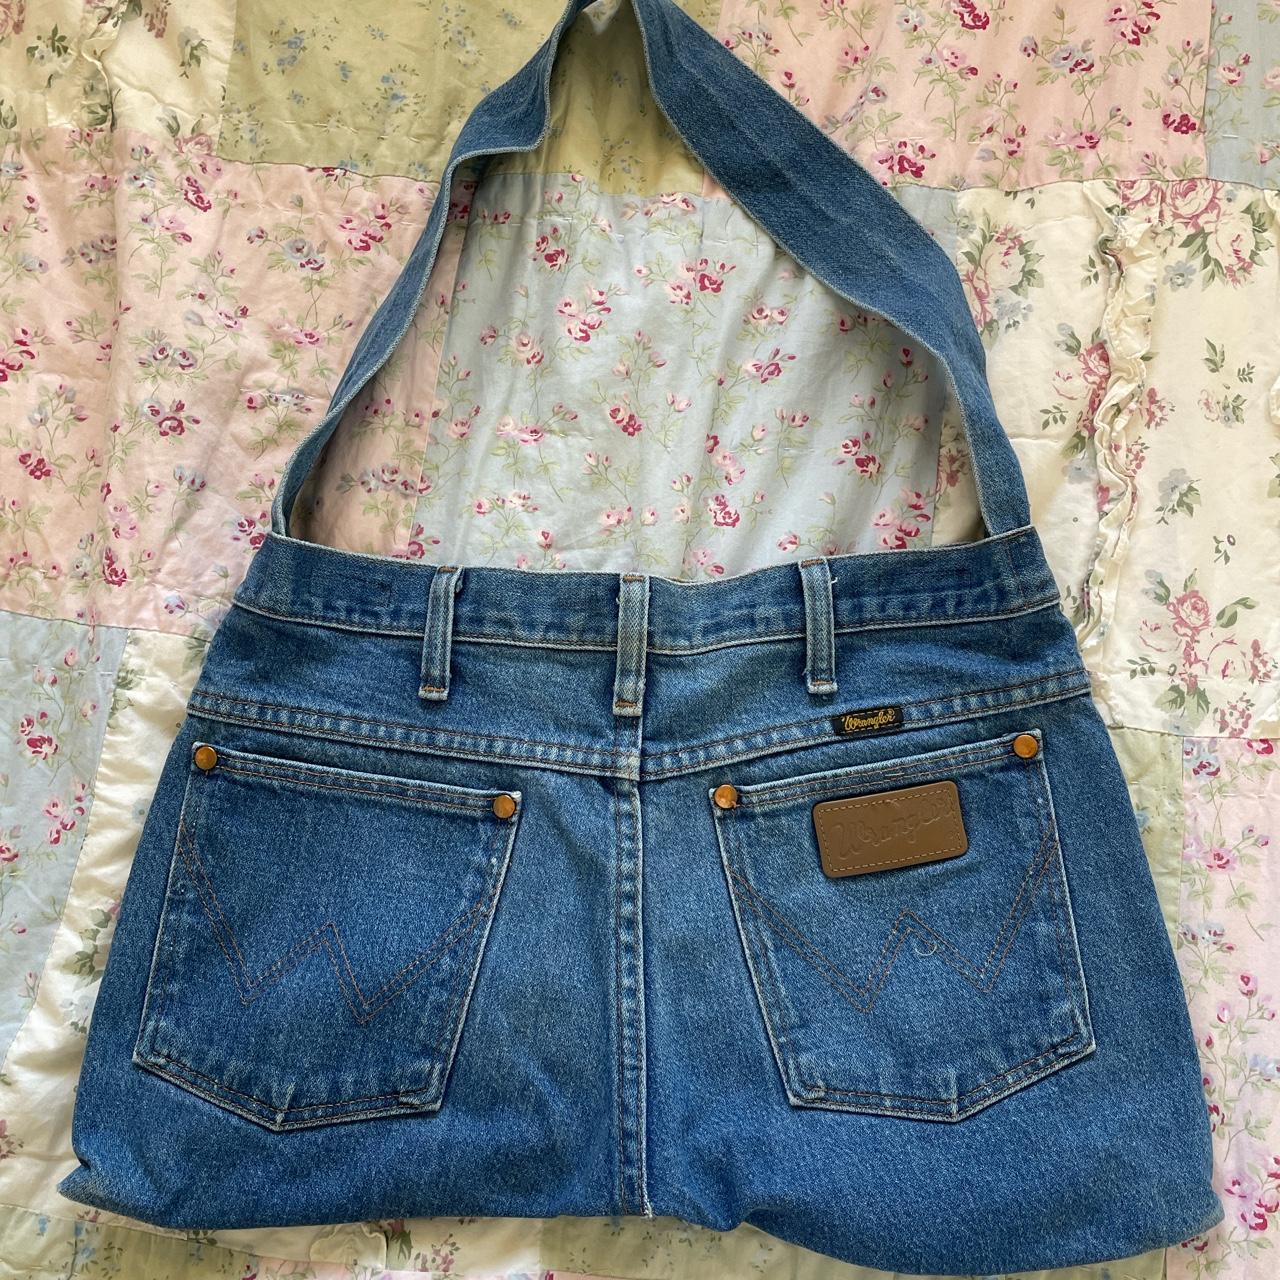 I made this denim shoulder bag from upcycled jeans. What do you think? :  r/upcycling